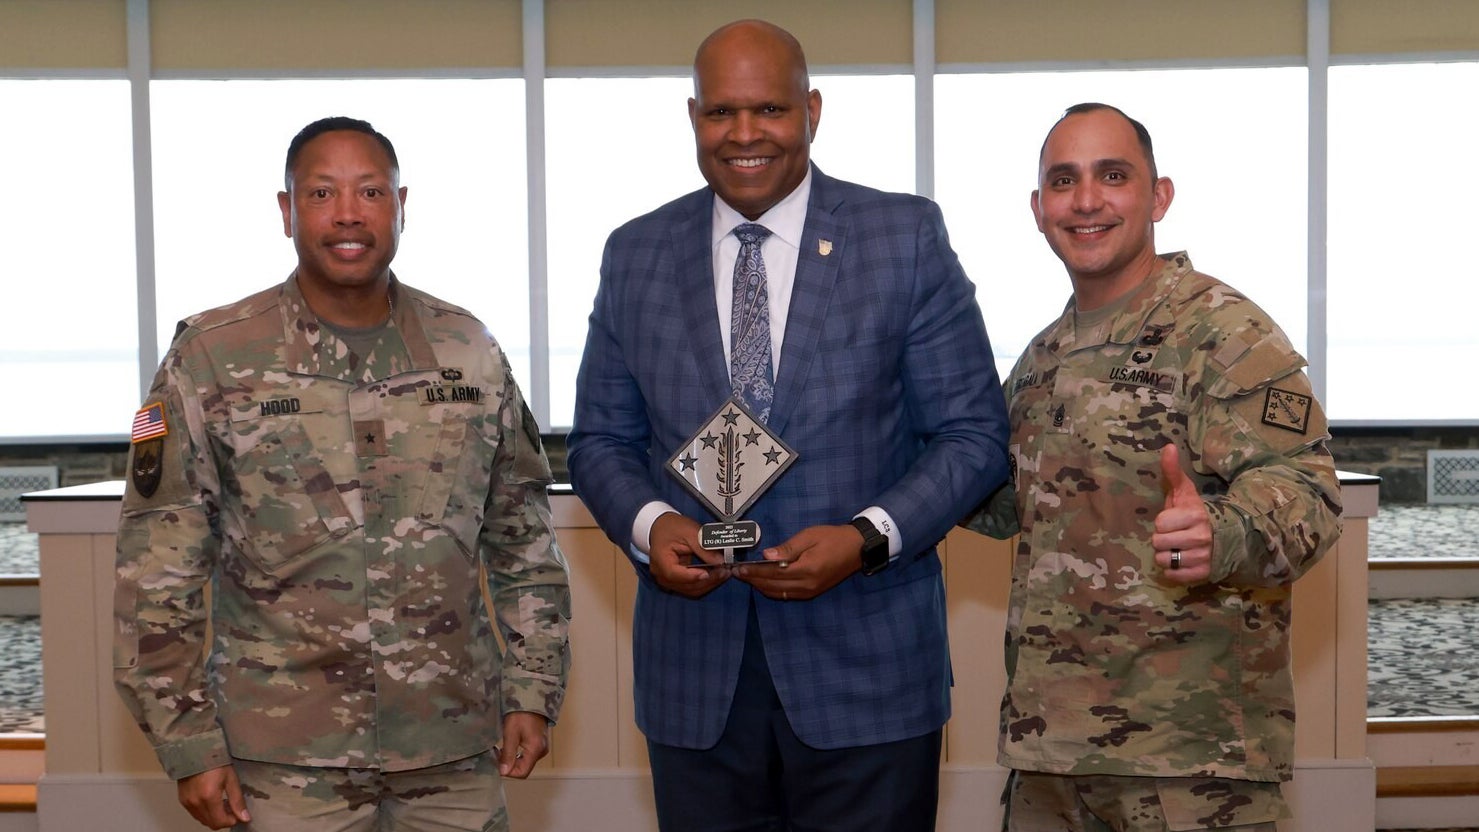 Ret. LTG Les Smith receives an award from two soldiers